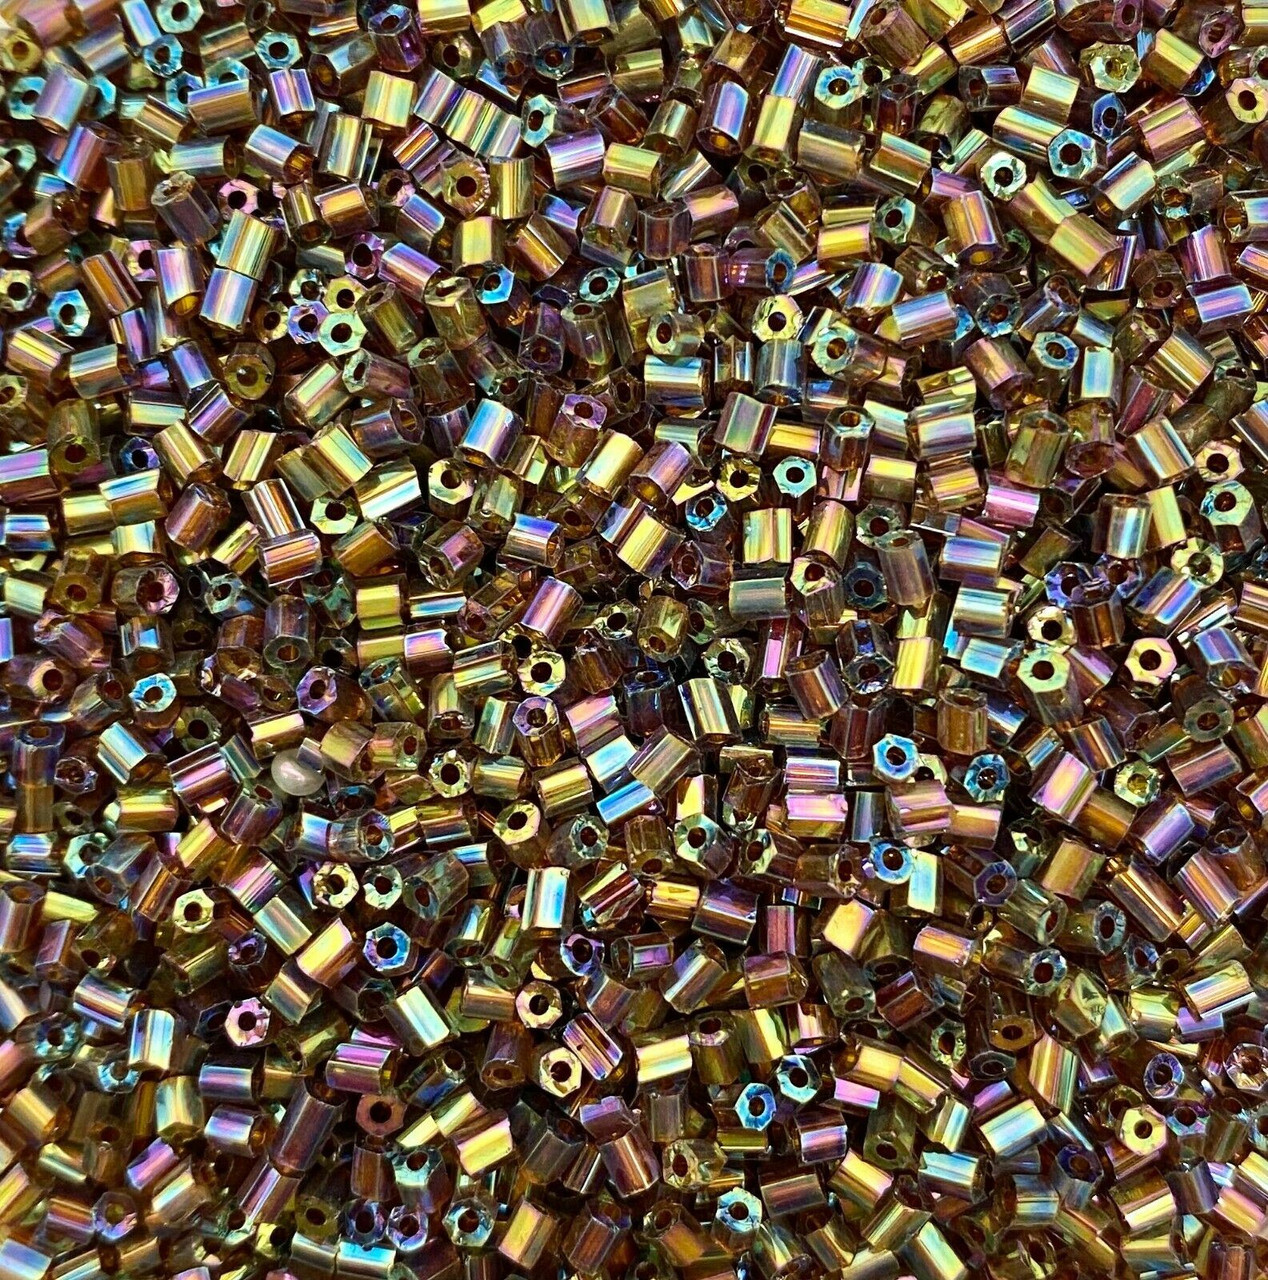 50g glass HEX seed beads - Brown Rainbow, size 11/0 (approx 2mm)